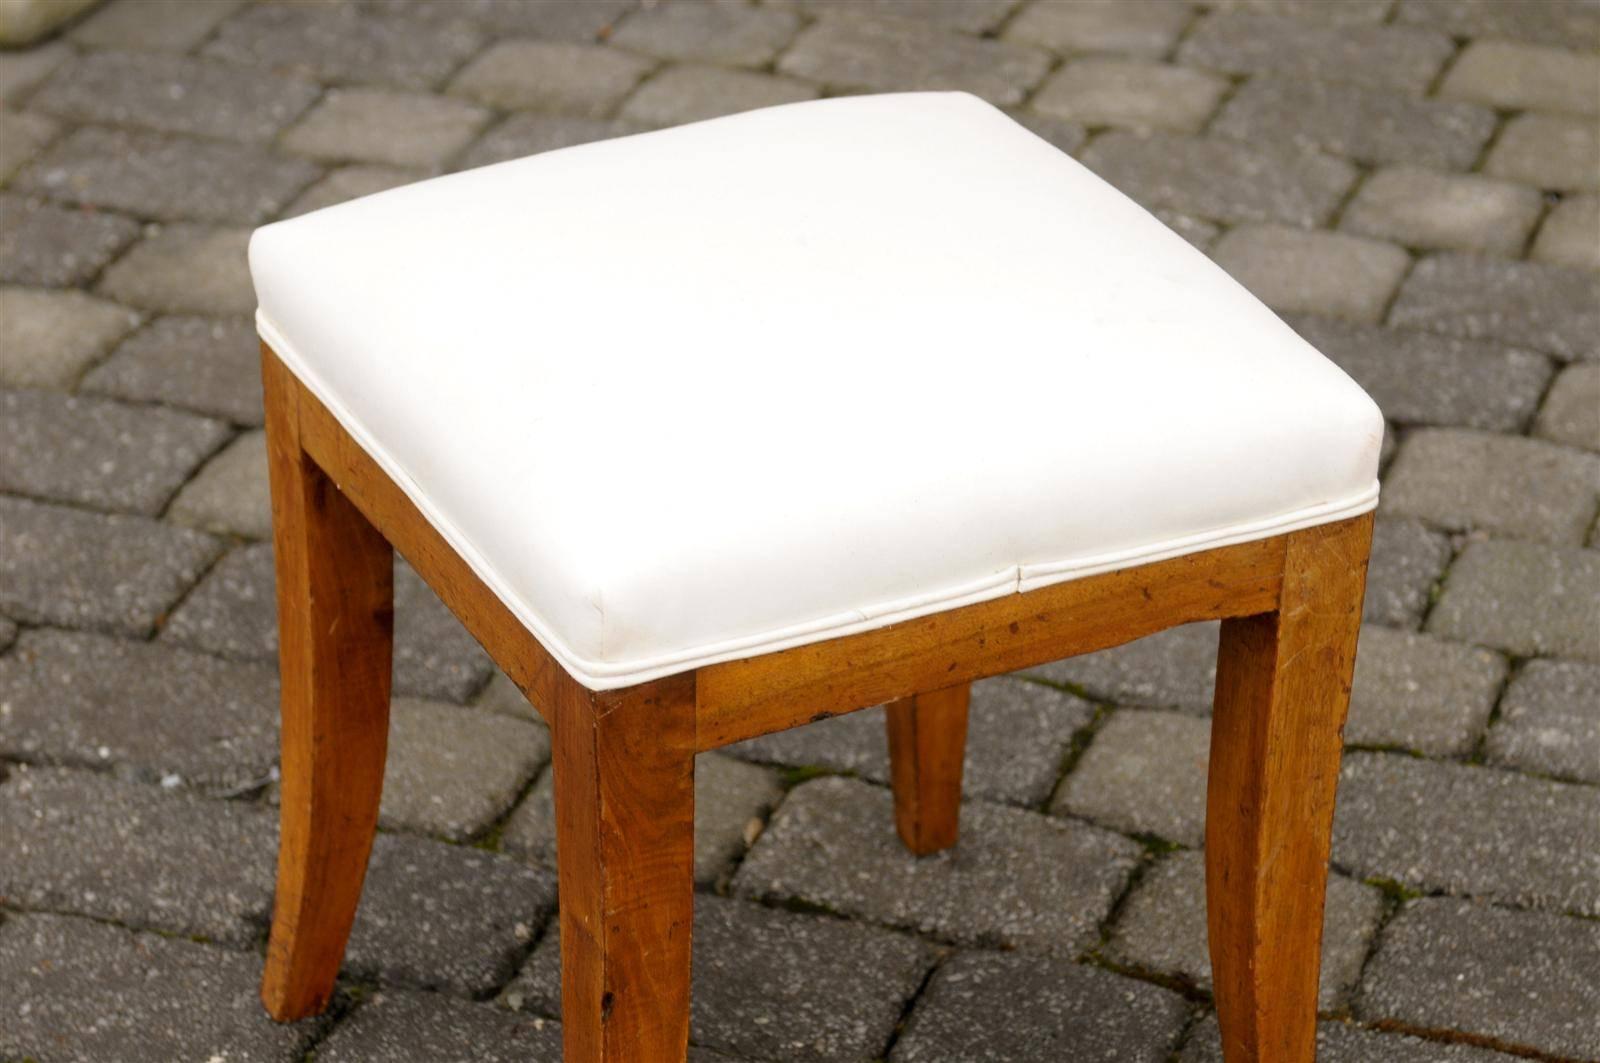 Muslin French Biedermeier Mid 19th Century Stool with Upholstered seat and Saber Legs